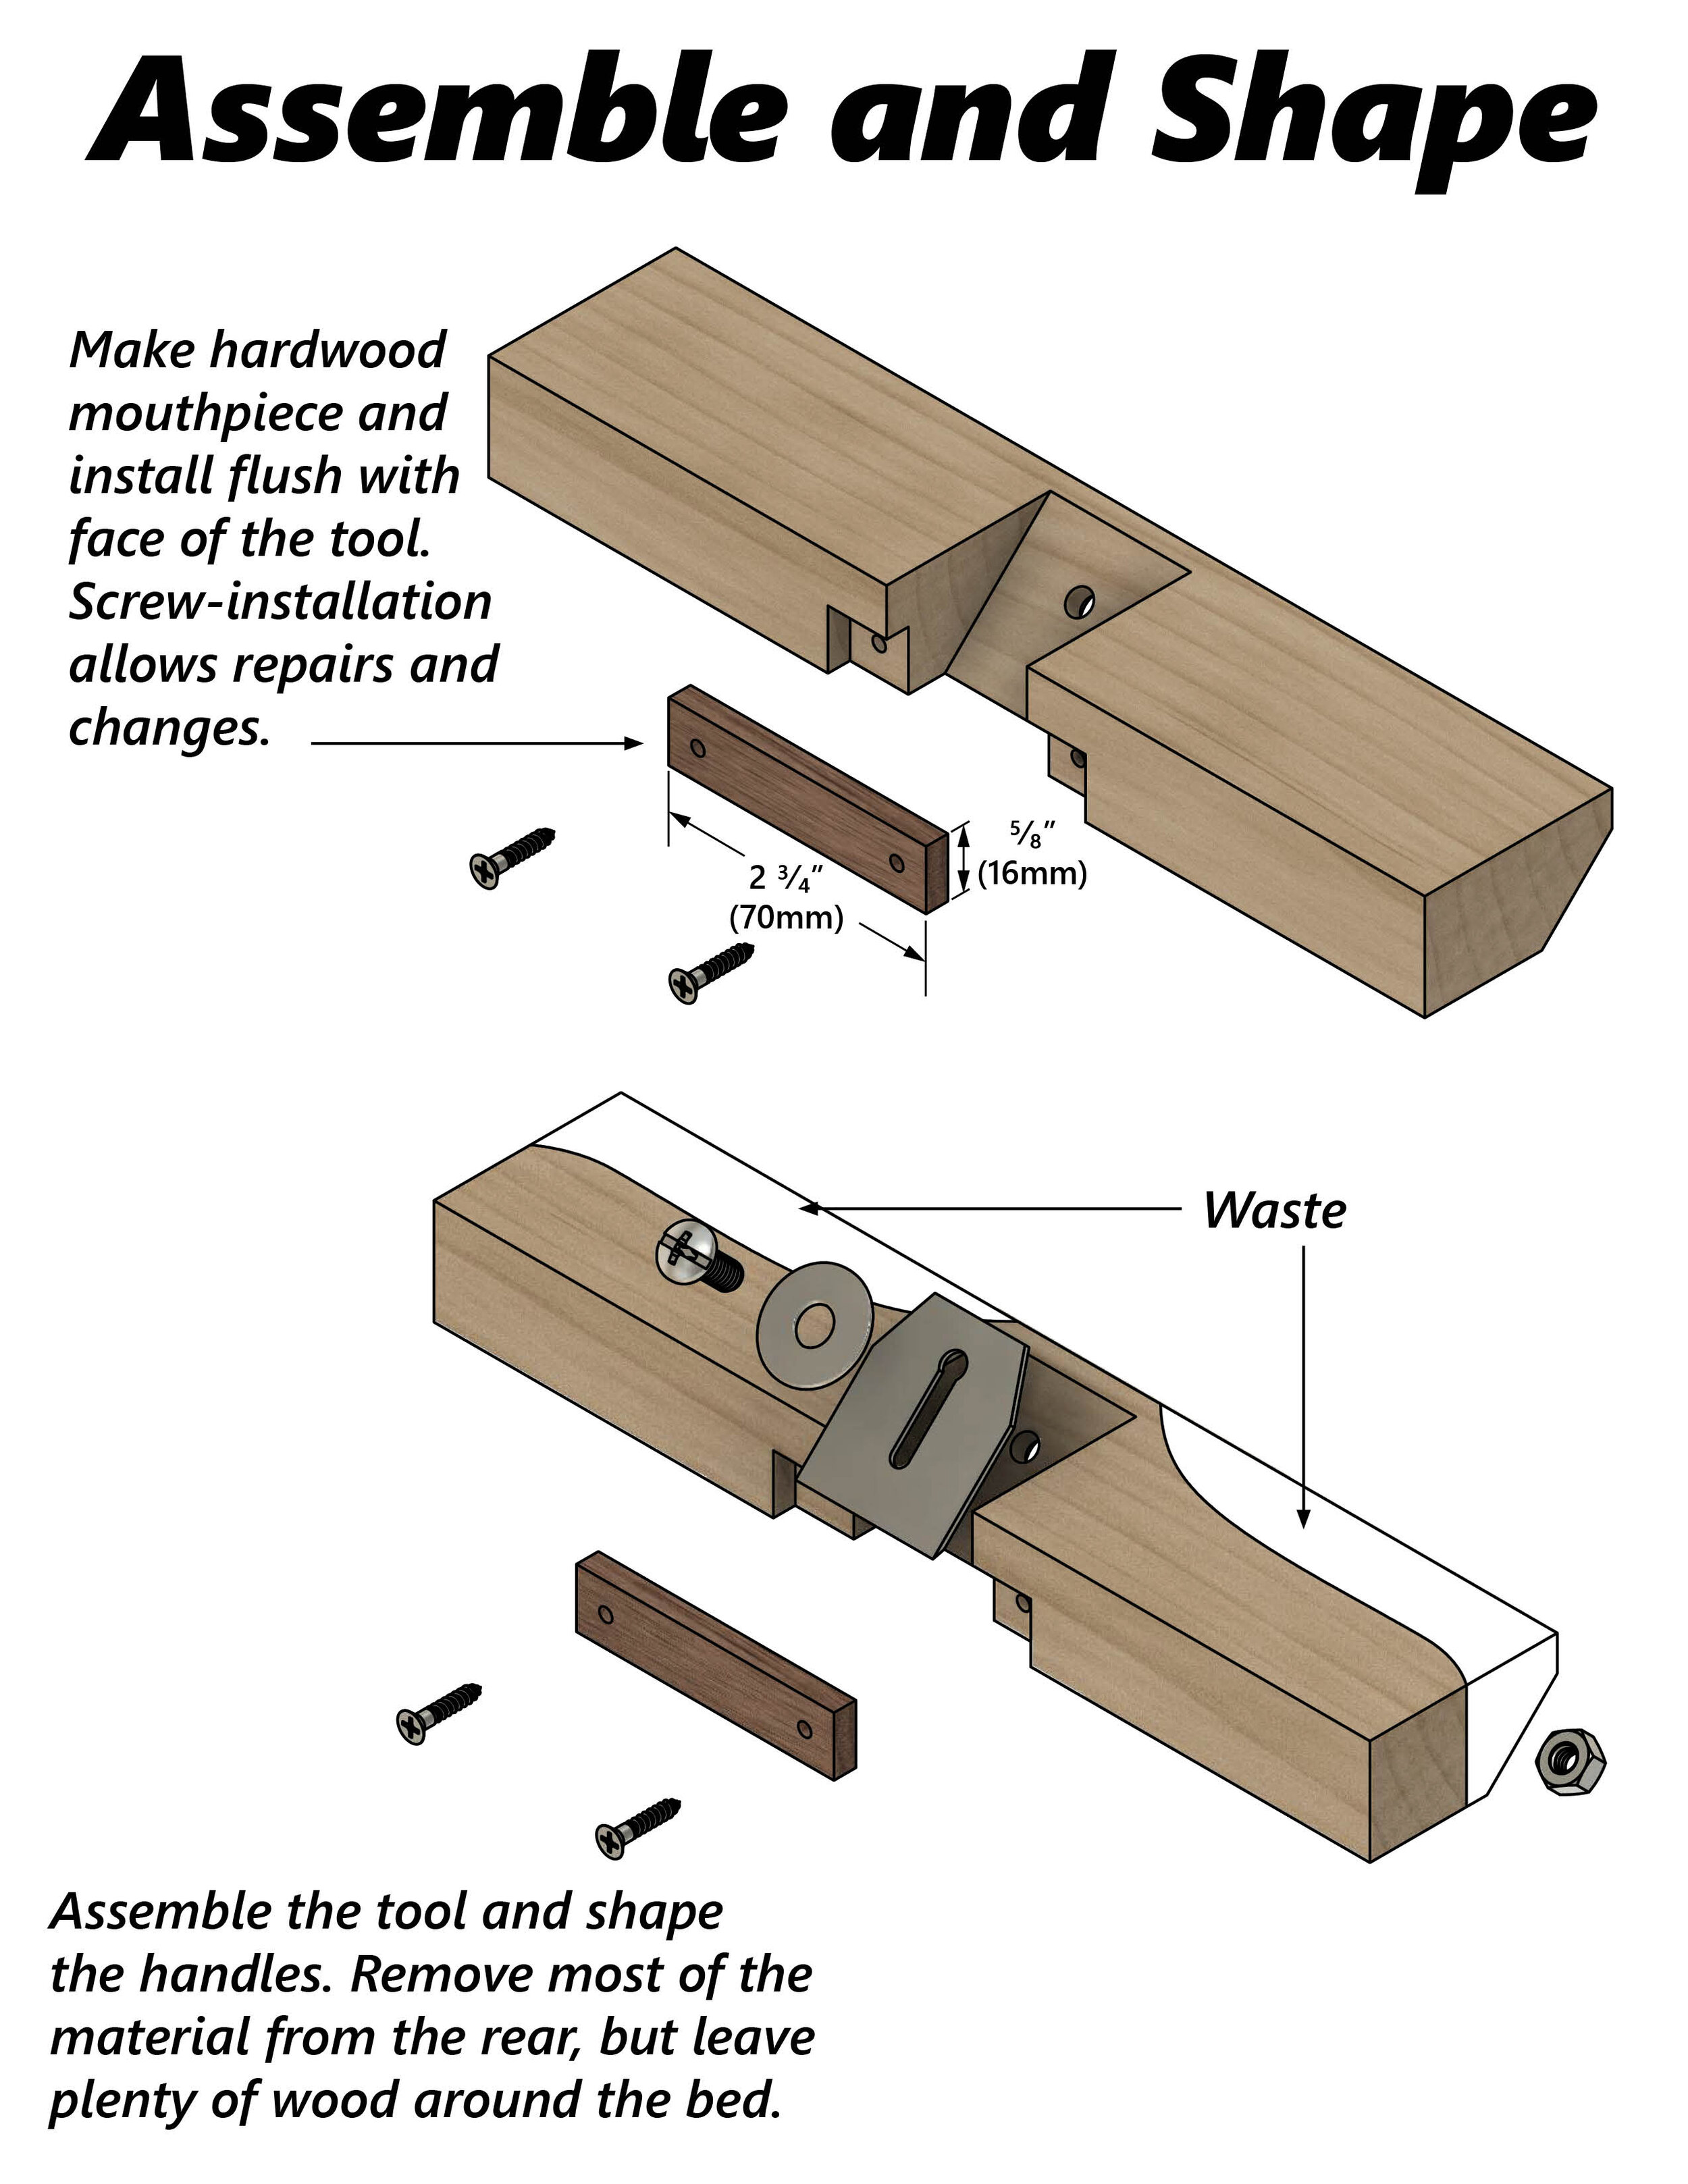 how to make a spokeshave